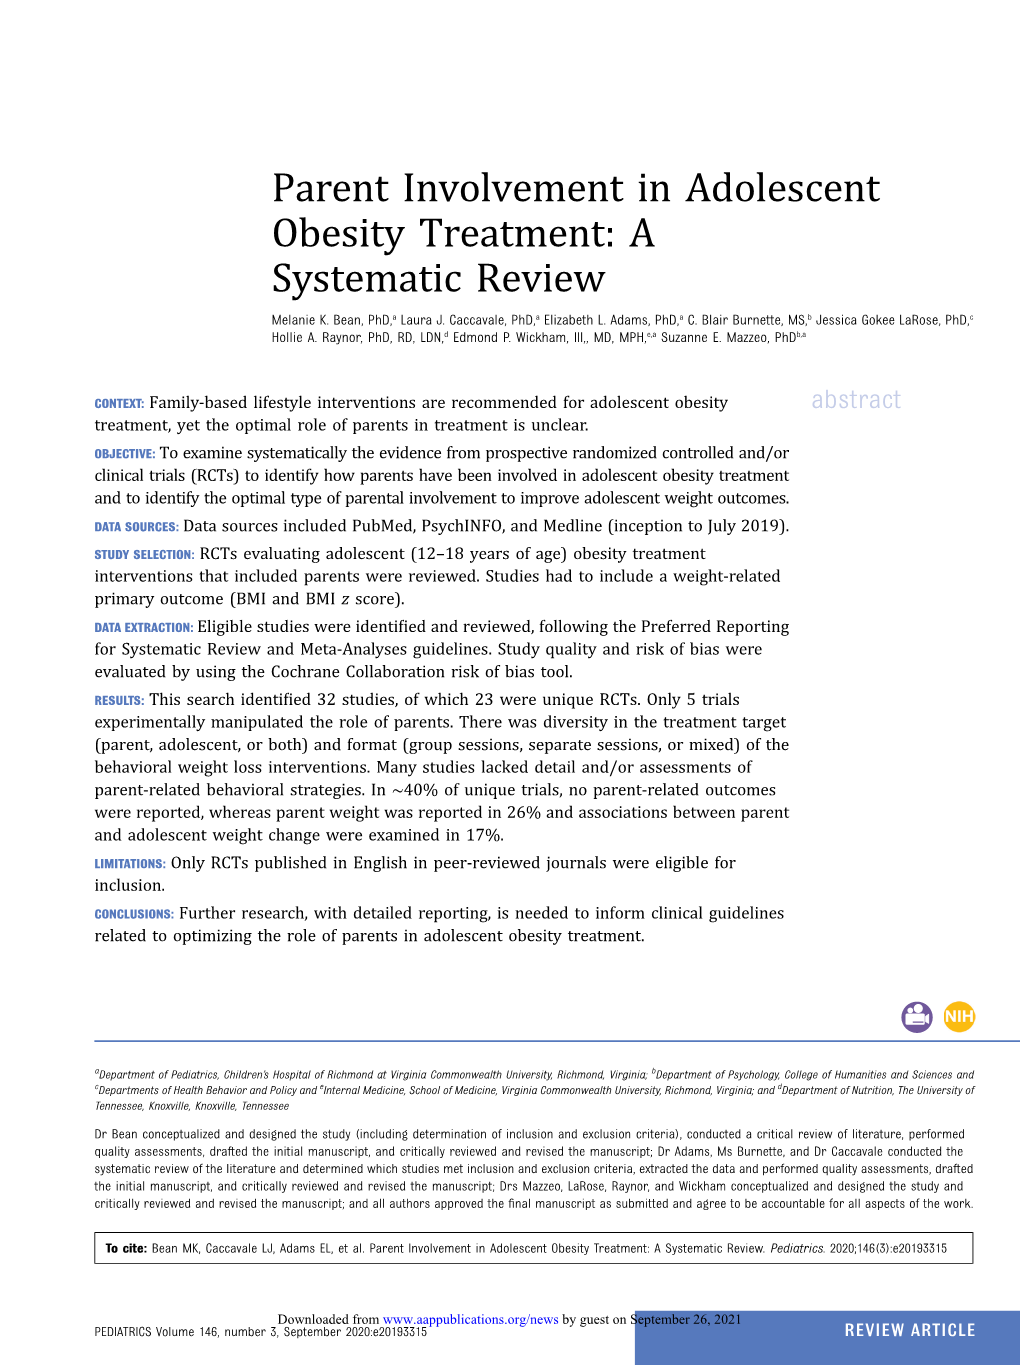 Parent Involvement in Adolescent Obesity Treatment: a Systematic Review Melanie K